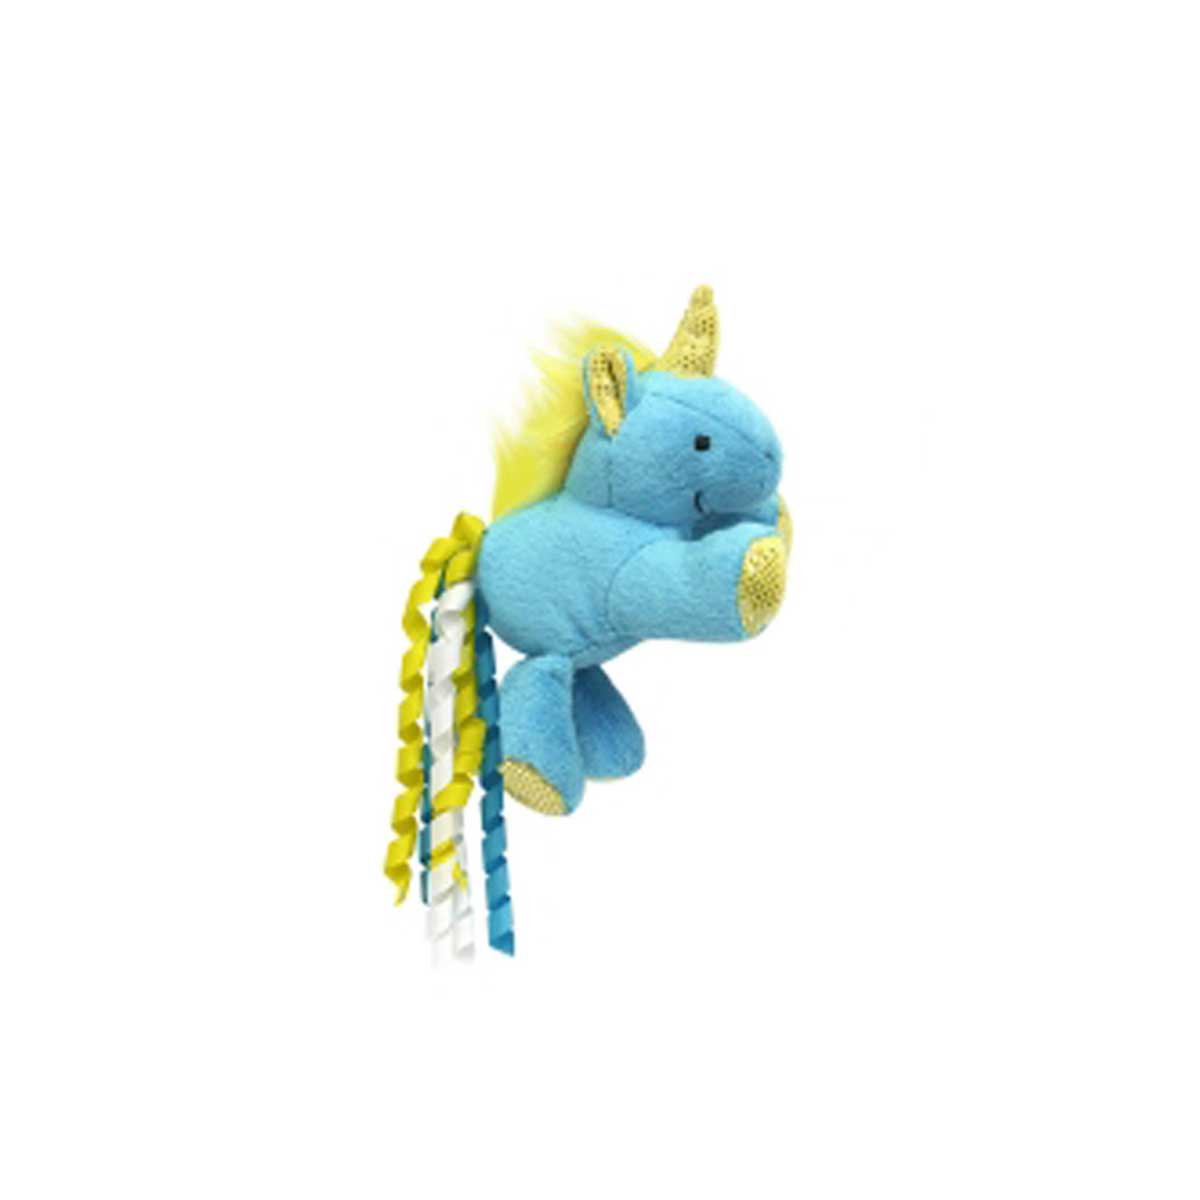 Unicorn Catnip Toys in Multiply Colors | Pawlicious & Company